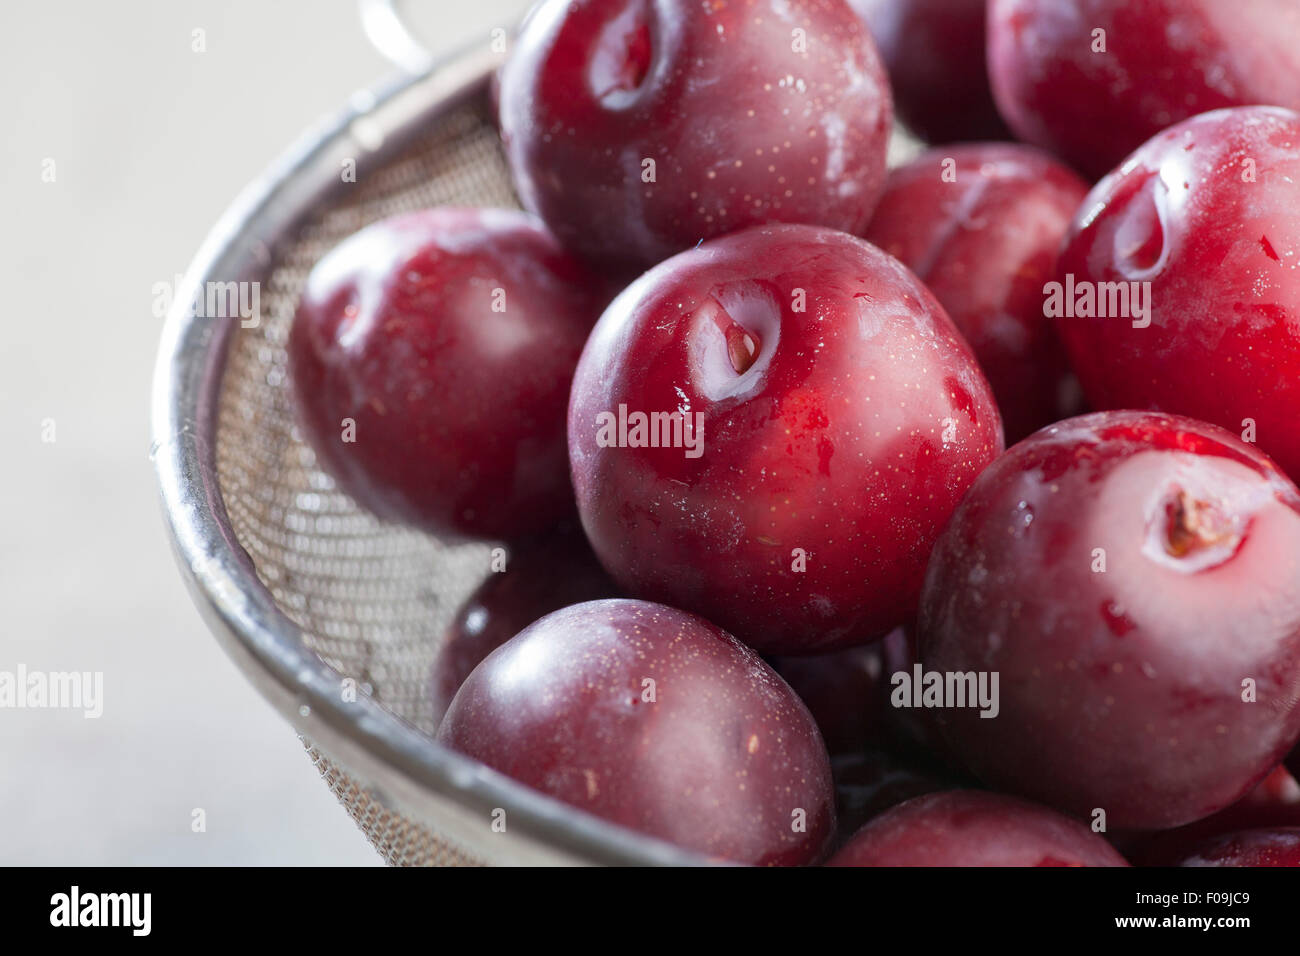 Washed Ripe Plums Stock Photo